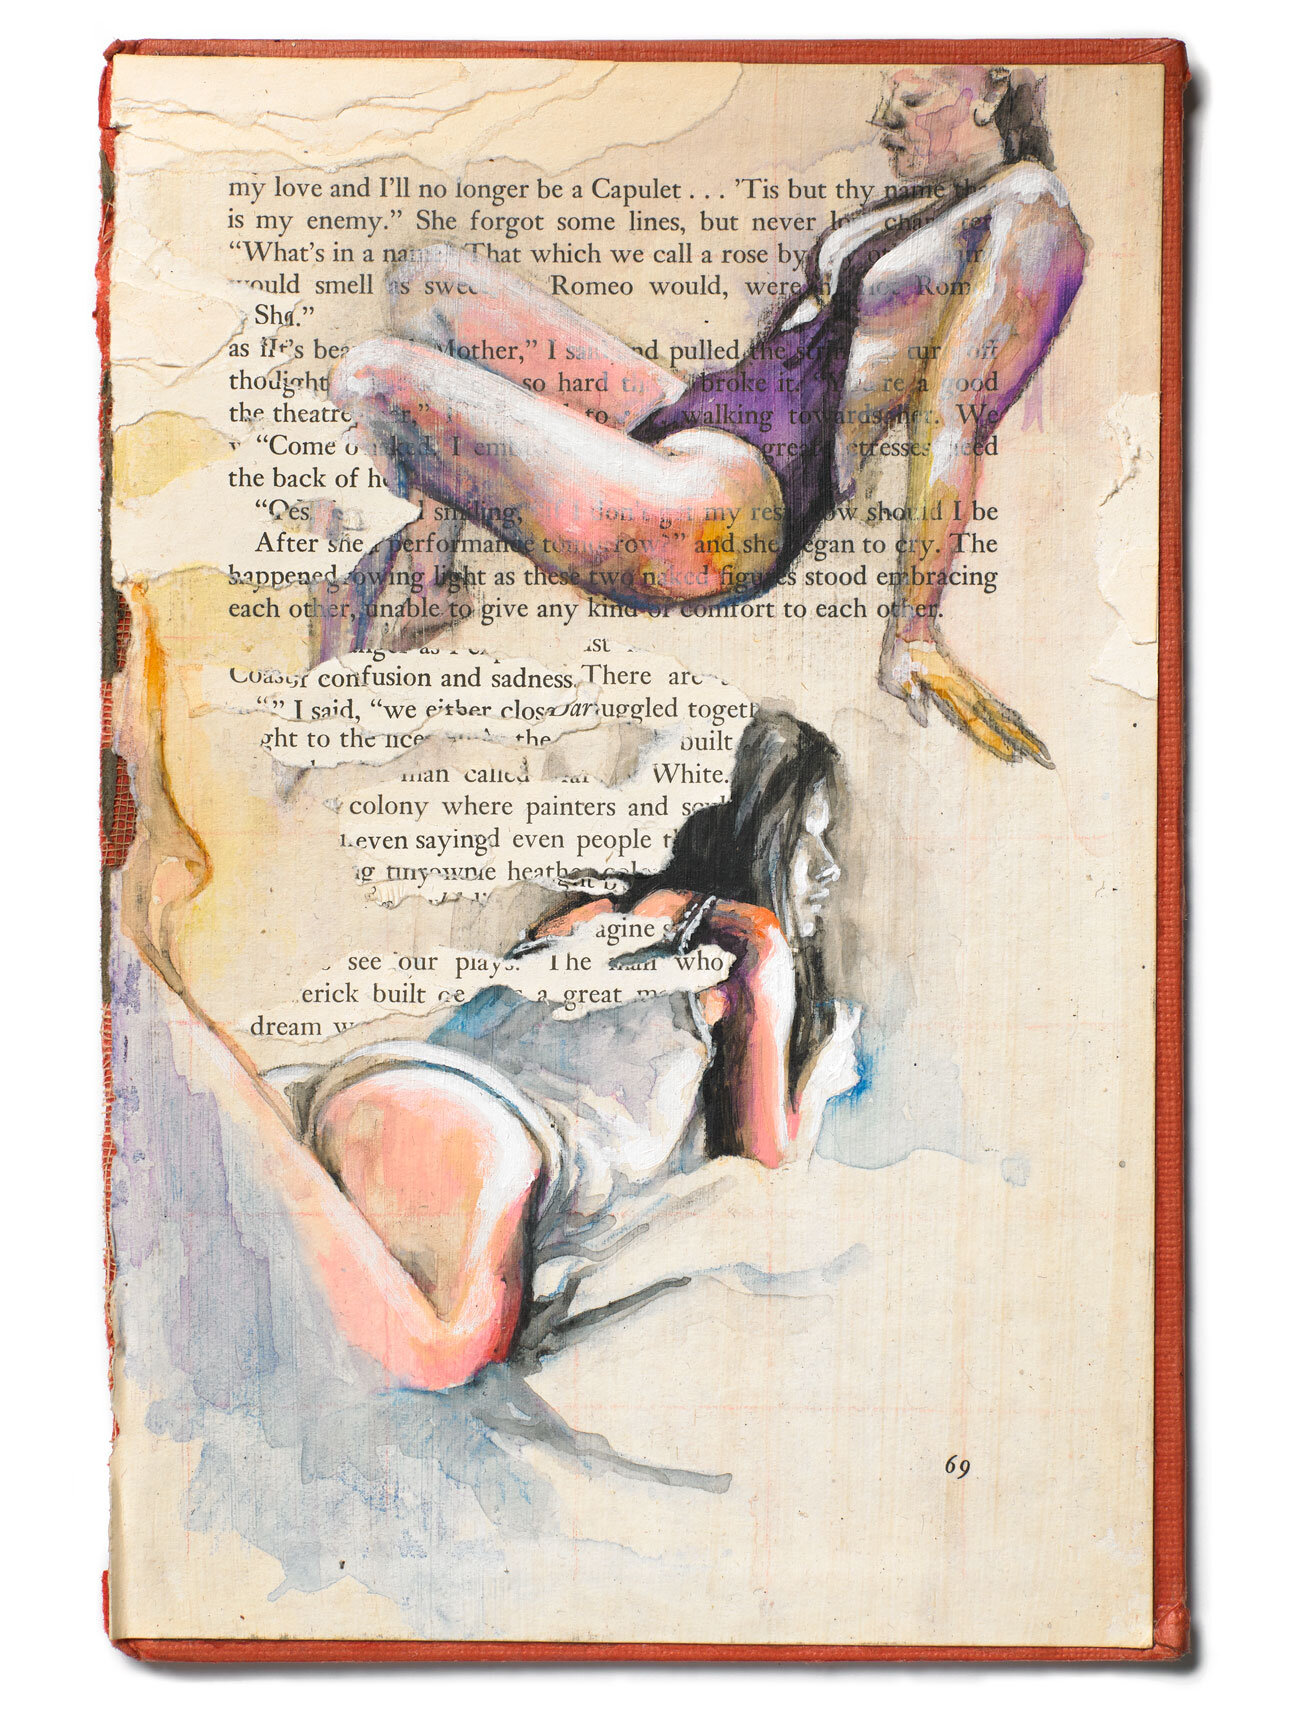    RESIST Portrait: Literary Series, That Which We Call A Rose   Watercolor on Book Cover 5.5in x 8.5in (Framed 11in x 14in) 